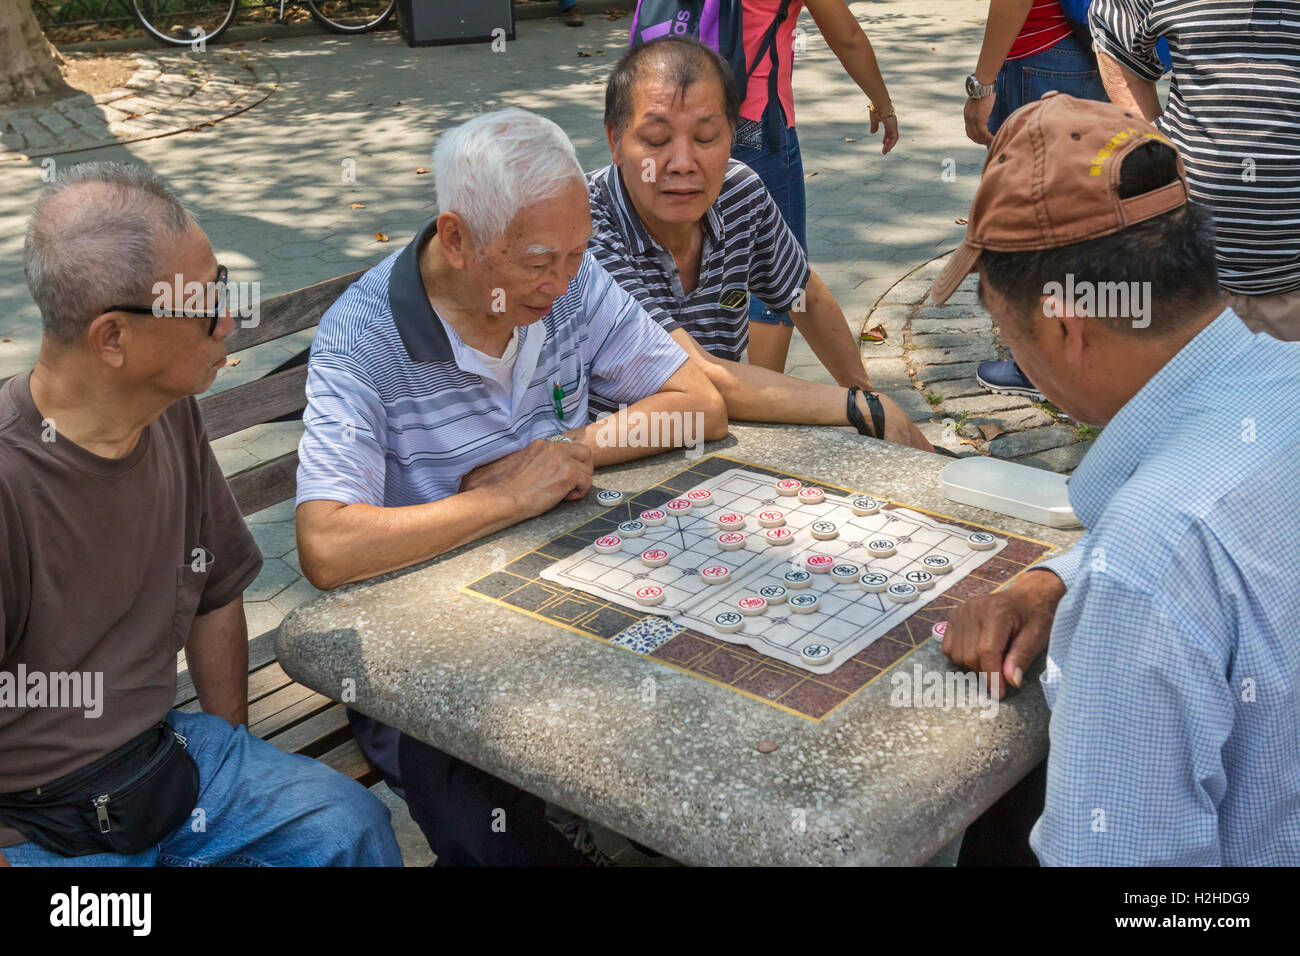 A group of Chinese Americans in Columbus Park in Chinatown, New York City playing Chinese Chess, also known as, Xiangqi. Stock Photo